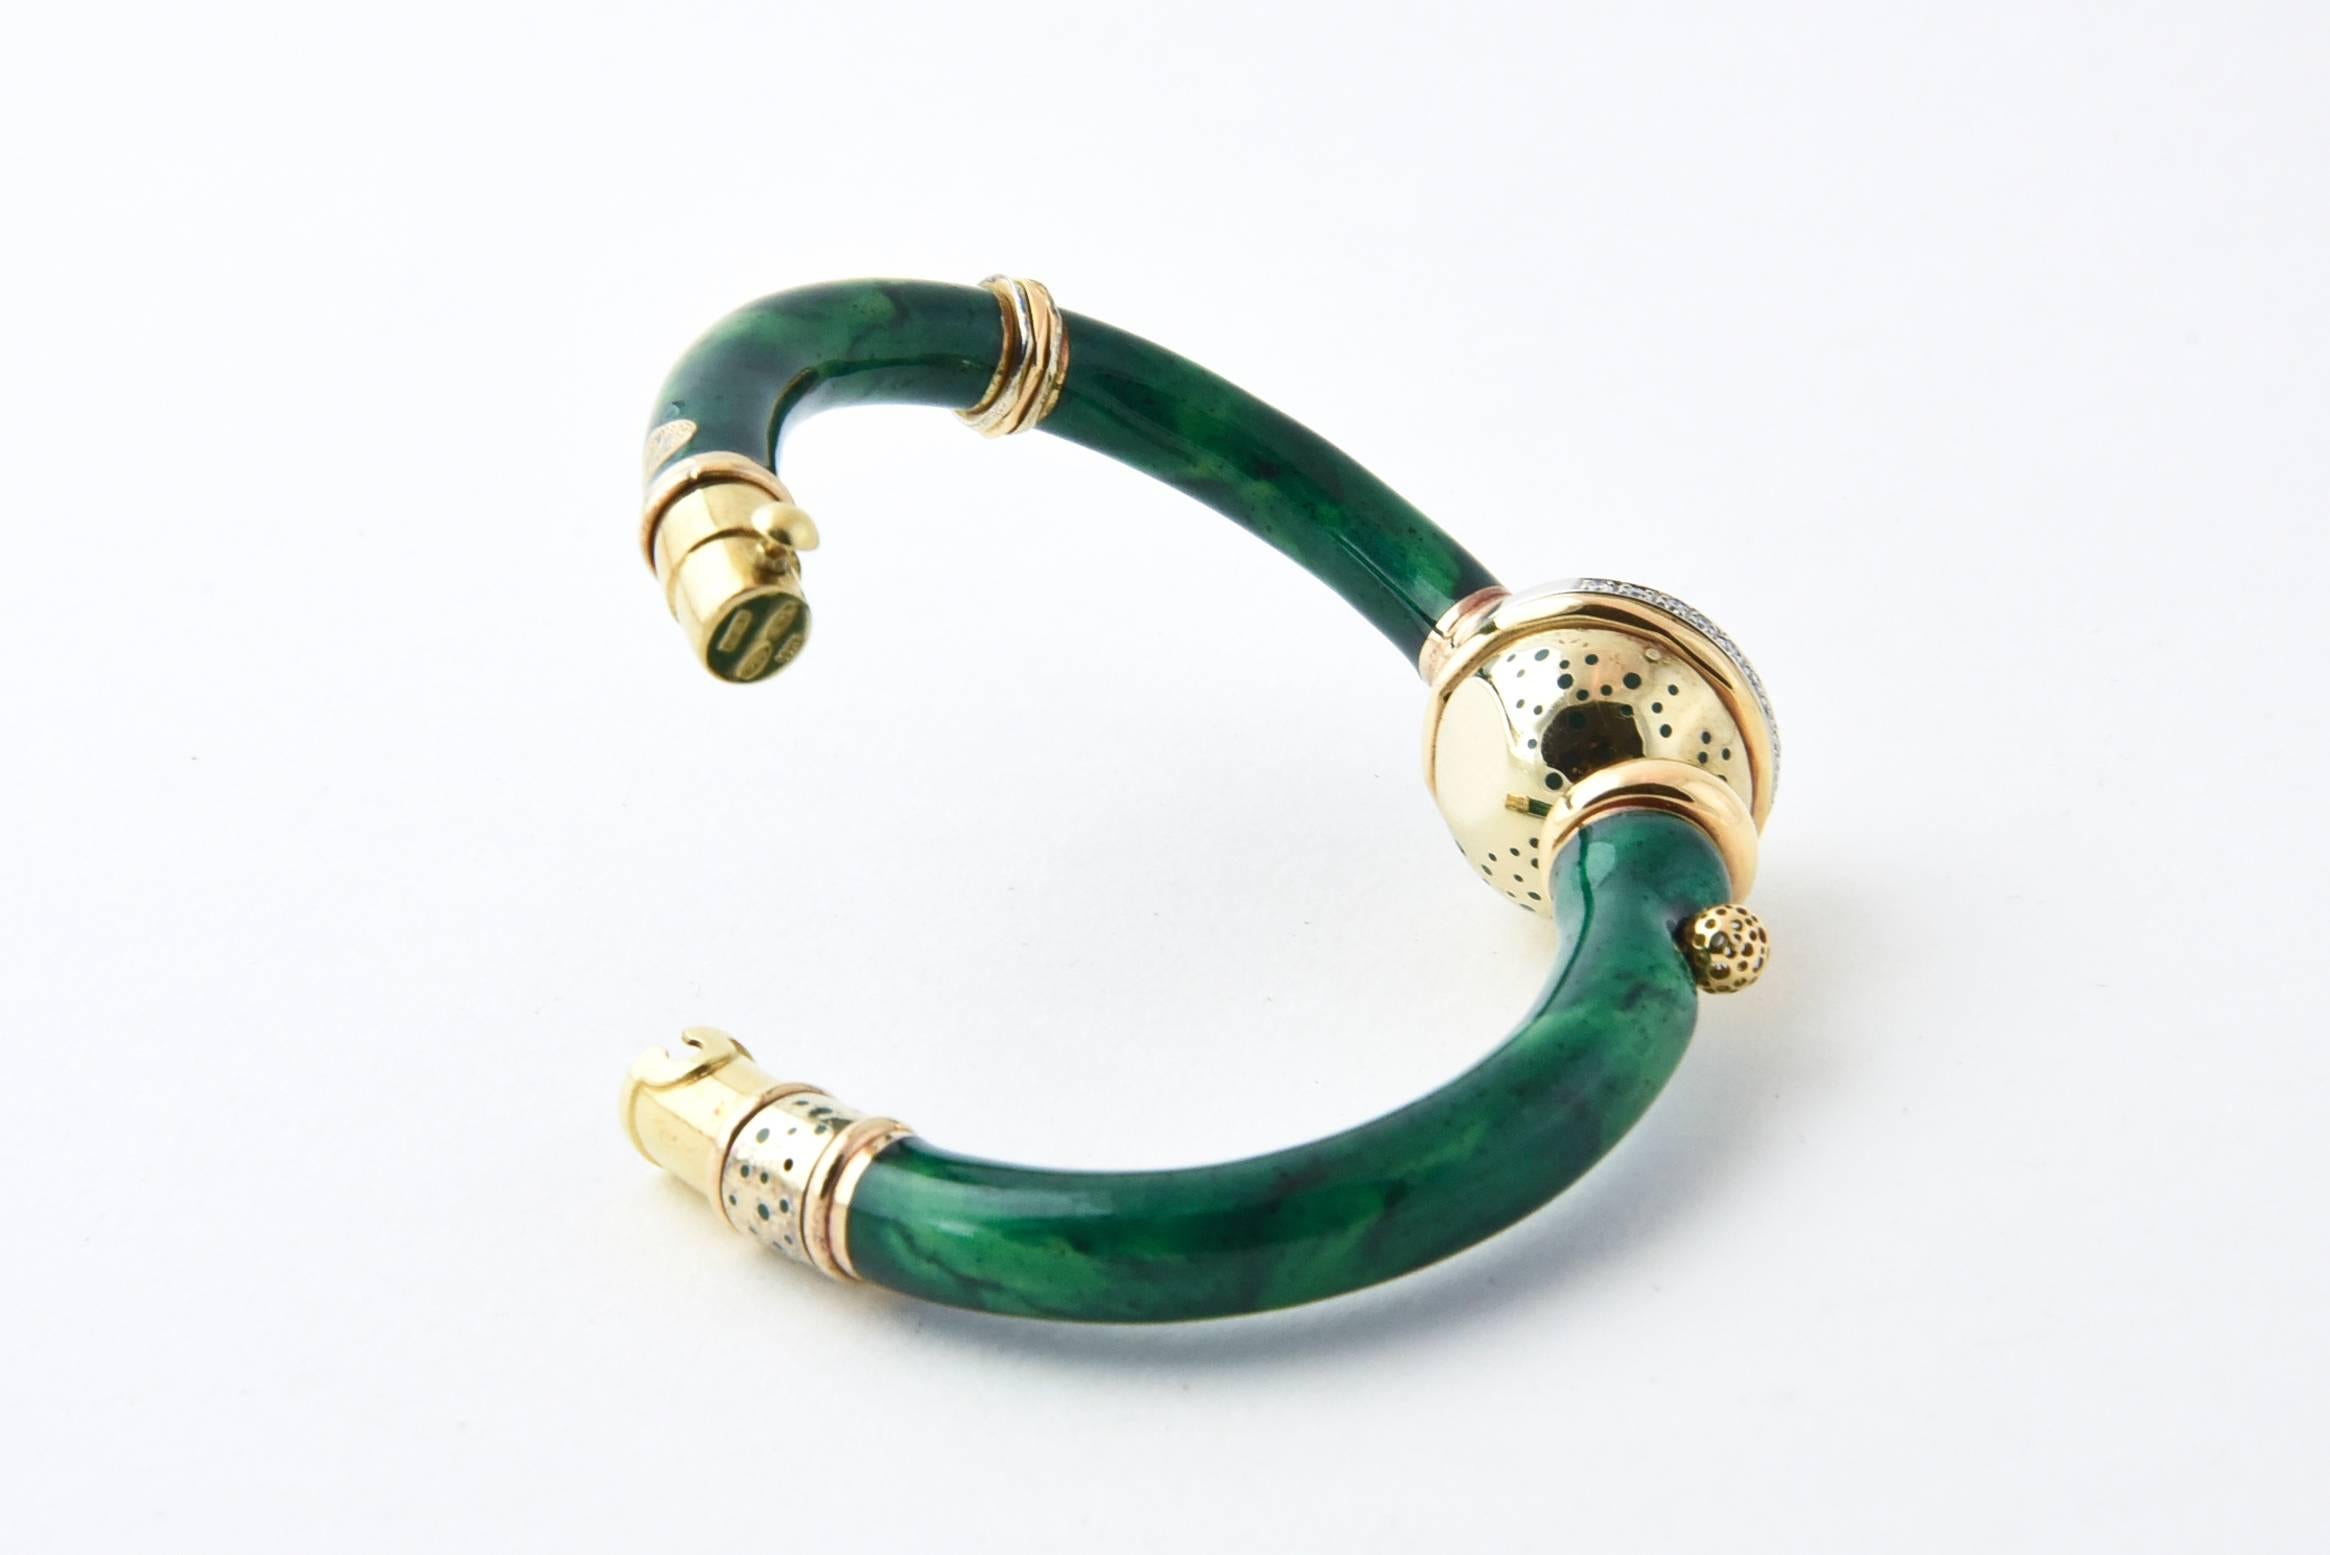 Nouvelle Bague 18K rose and yellow gold tubular and gold ball hinged bracelet with green enameled design and diamond accents. Diamonds, approximate total weight .18 carats.
Interior, 6